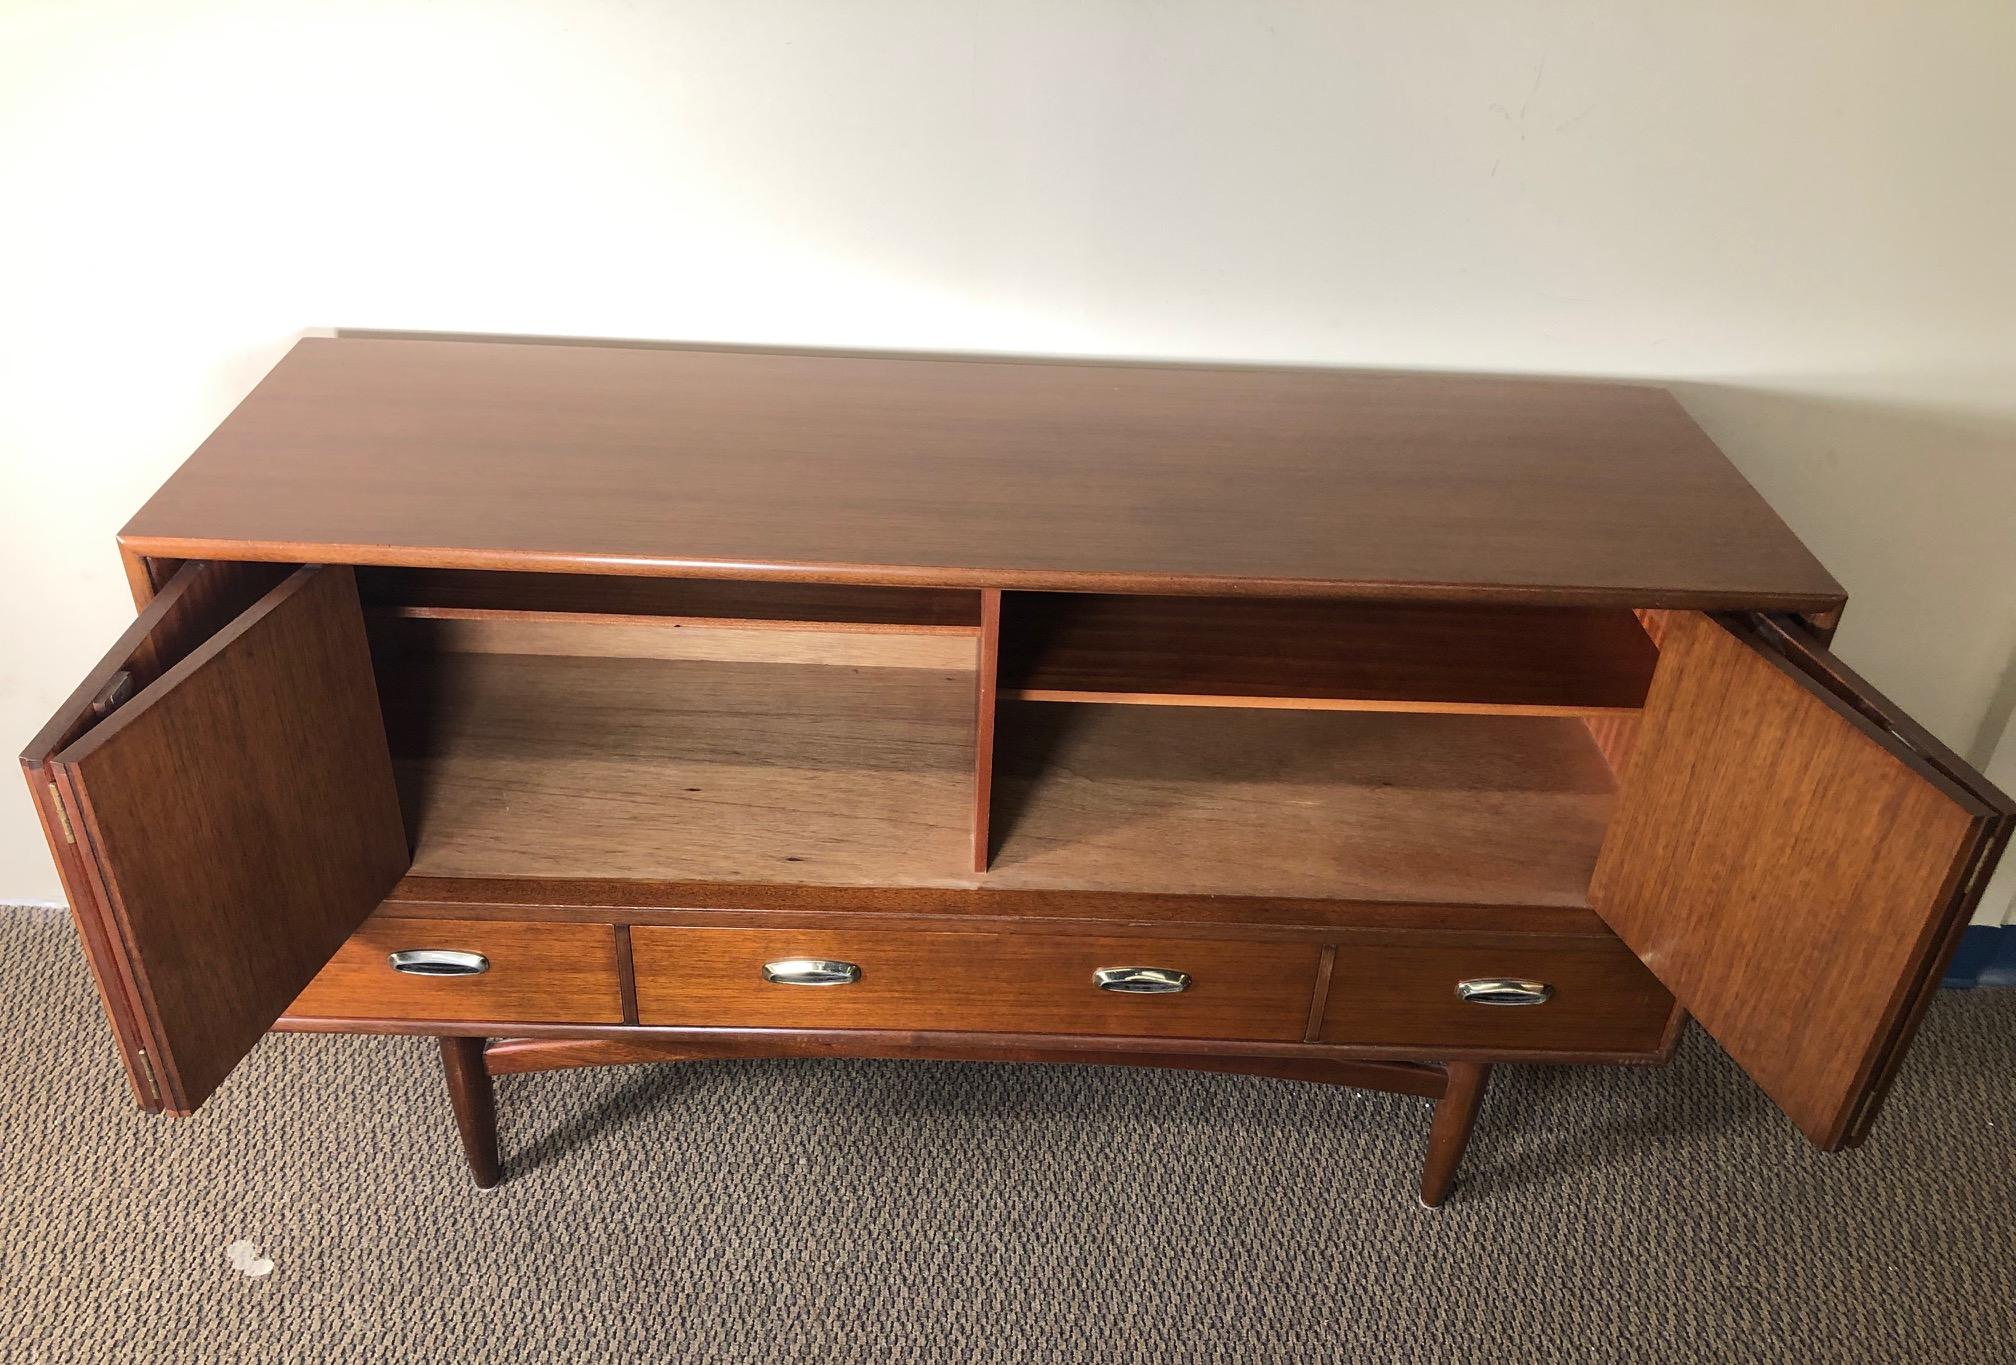 English Midcentury Mahogany Credenza Sideboard with Metal Pulls by G Plan For Sale